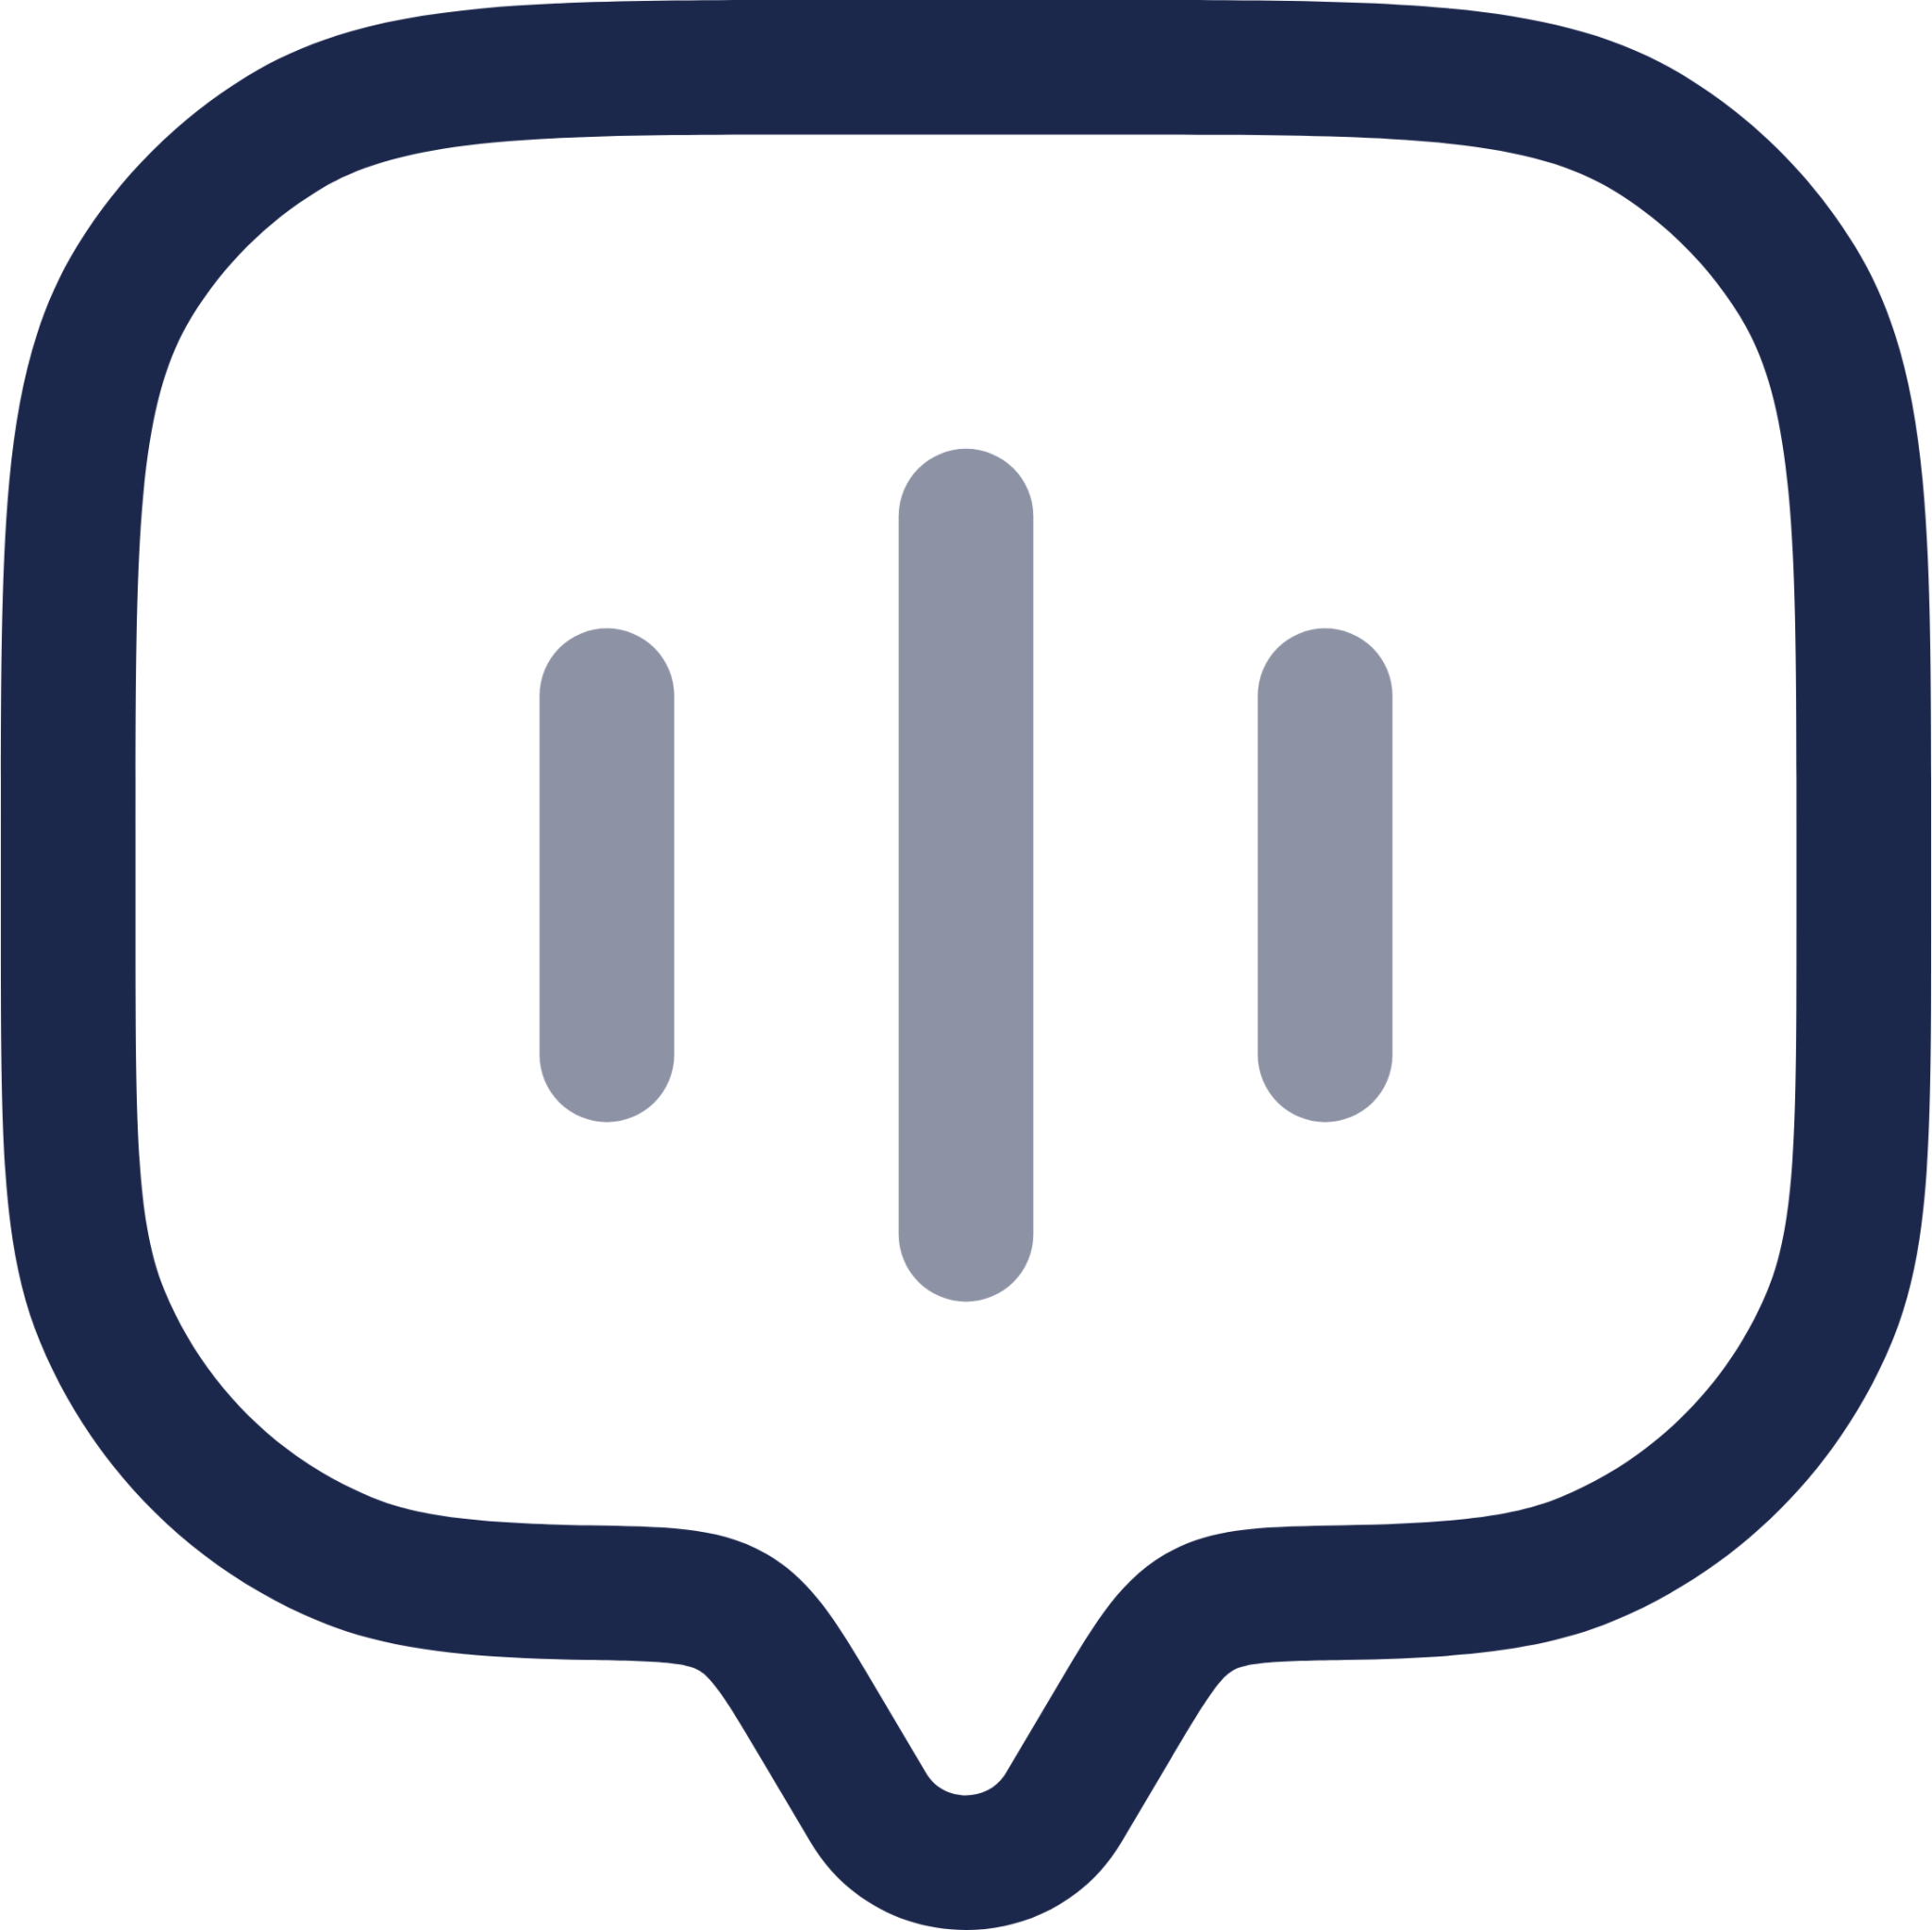 Chat Square Call icon